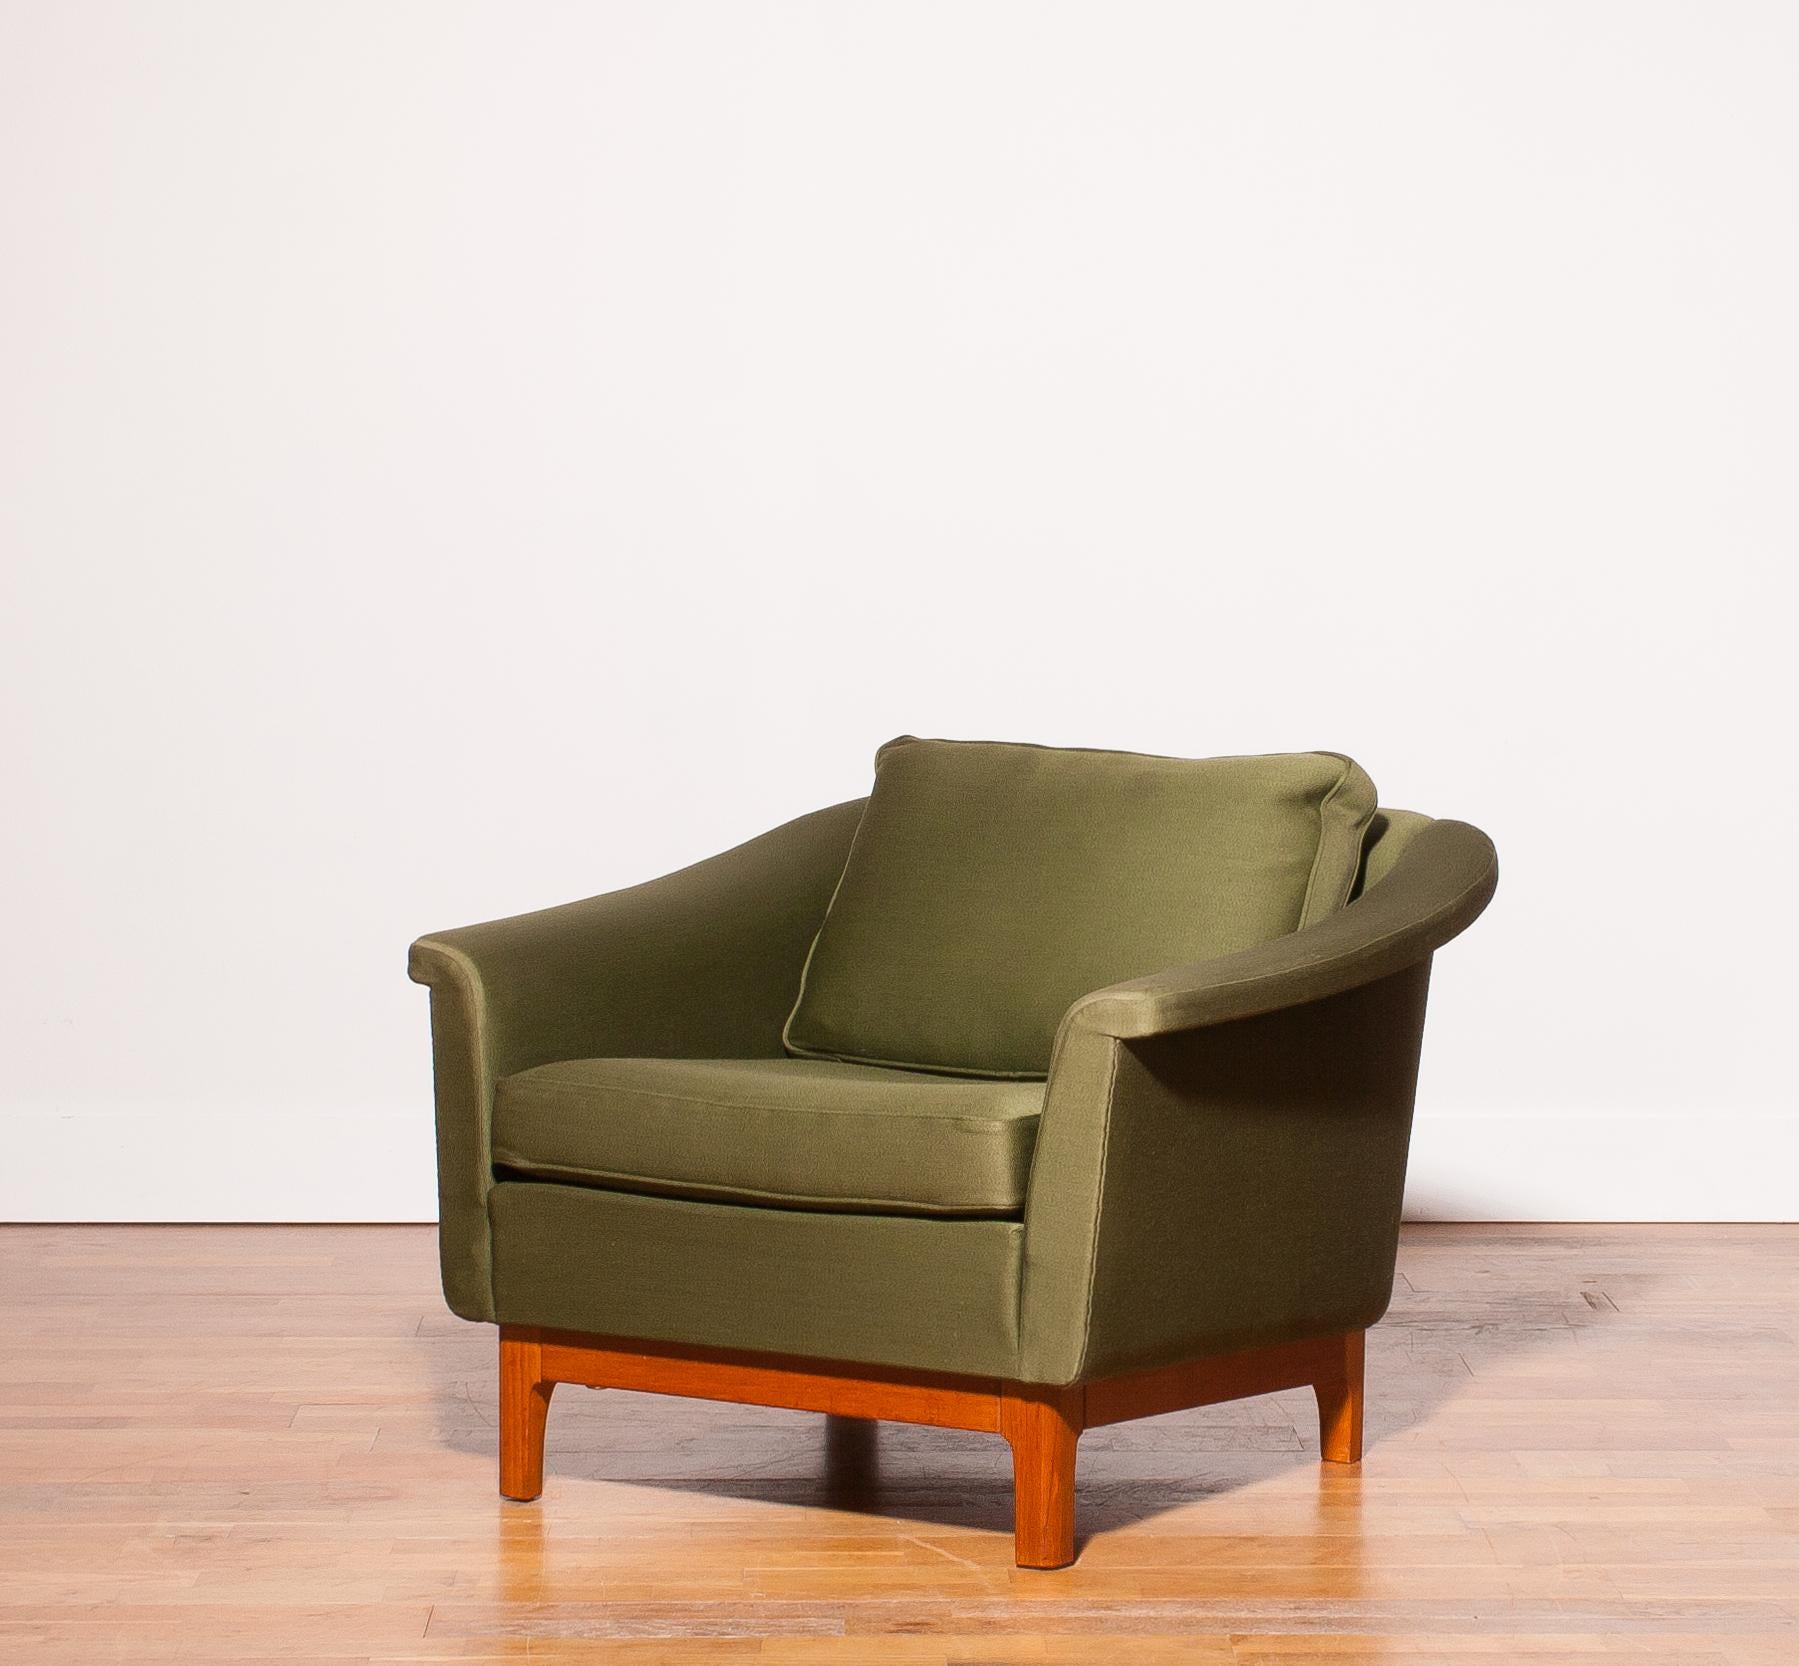 Beautiful lounge chair 'Pasadena' designed by Folke Ohlsson
and produced by DUX Ljungs Industrier, Sweden.
It is a very solid chair with a green upholstery
and teak frame.
The chair is in good condition.
Period 1960s
Dimensions: H 65 cm, W 85